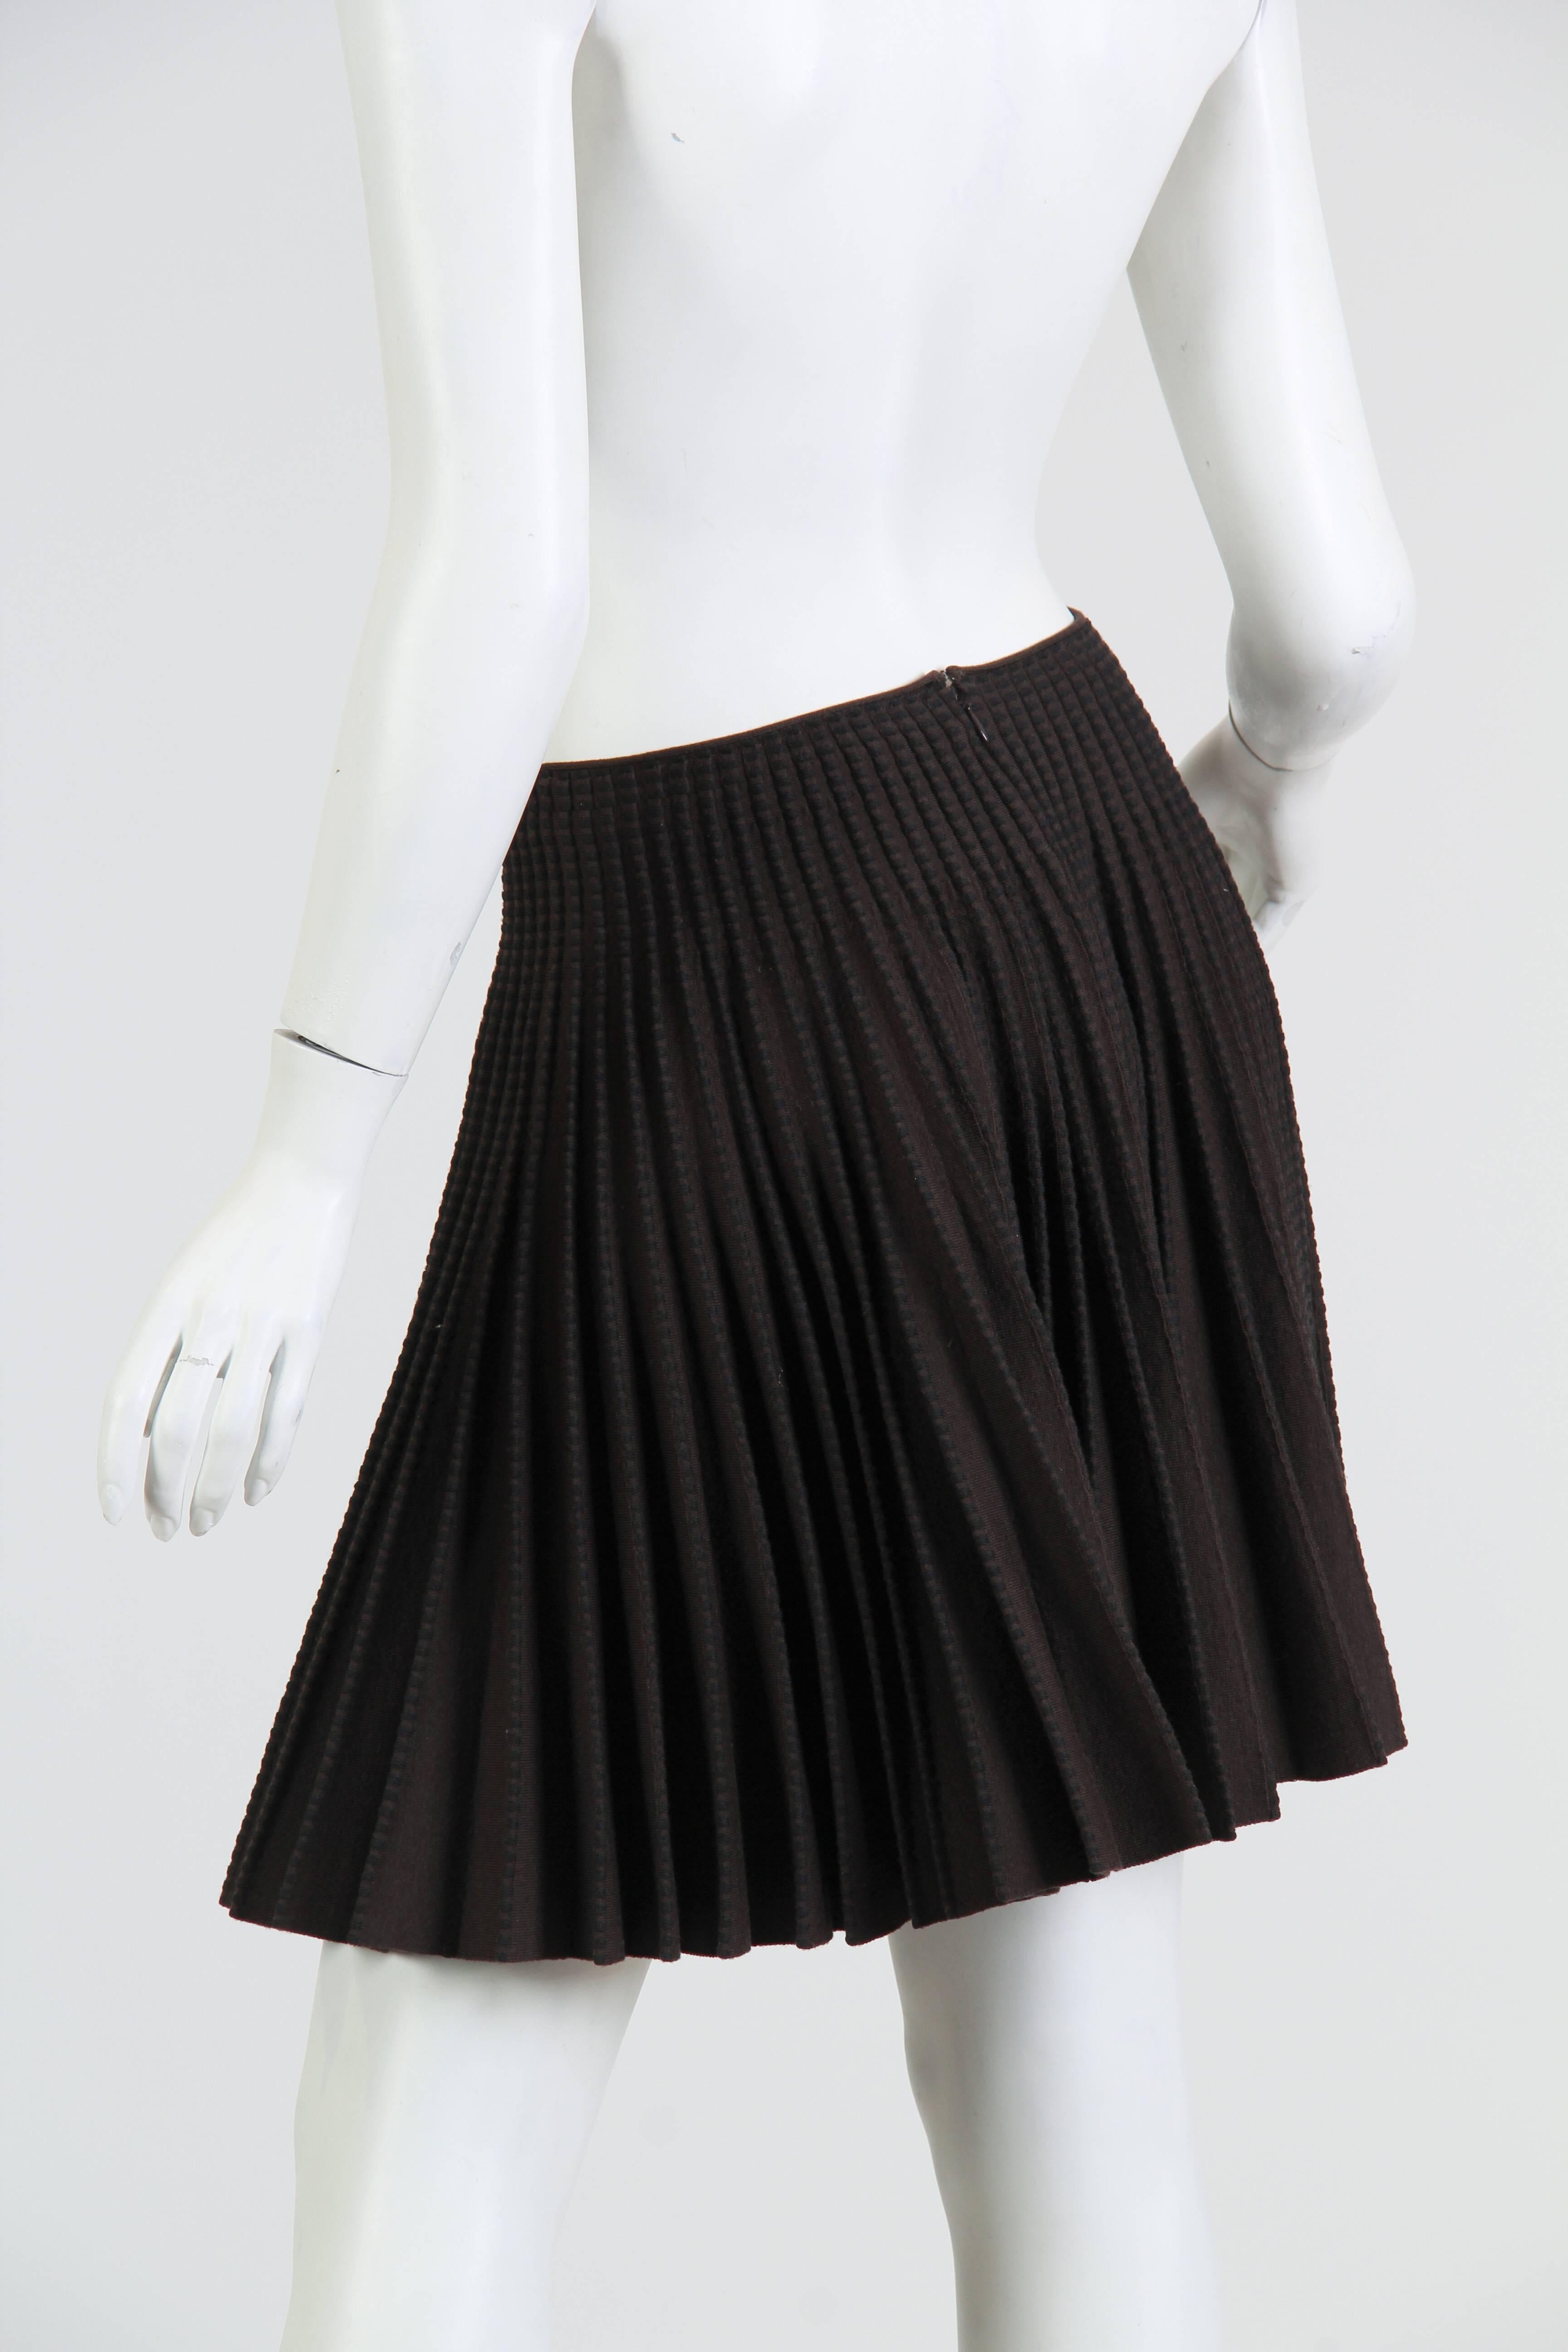 1990S AZZEDINE ALAIA Chocolate Brown & Black Rayon Blend Knit Ra-Ra Skirt In Excellent Condition For Sale In New York, NY